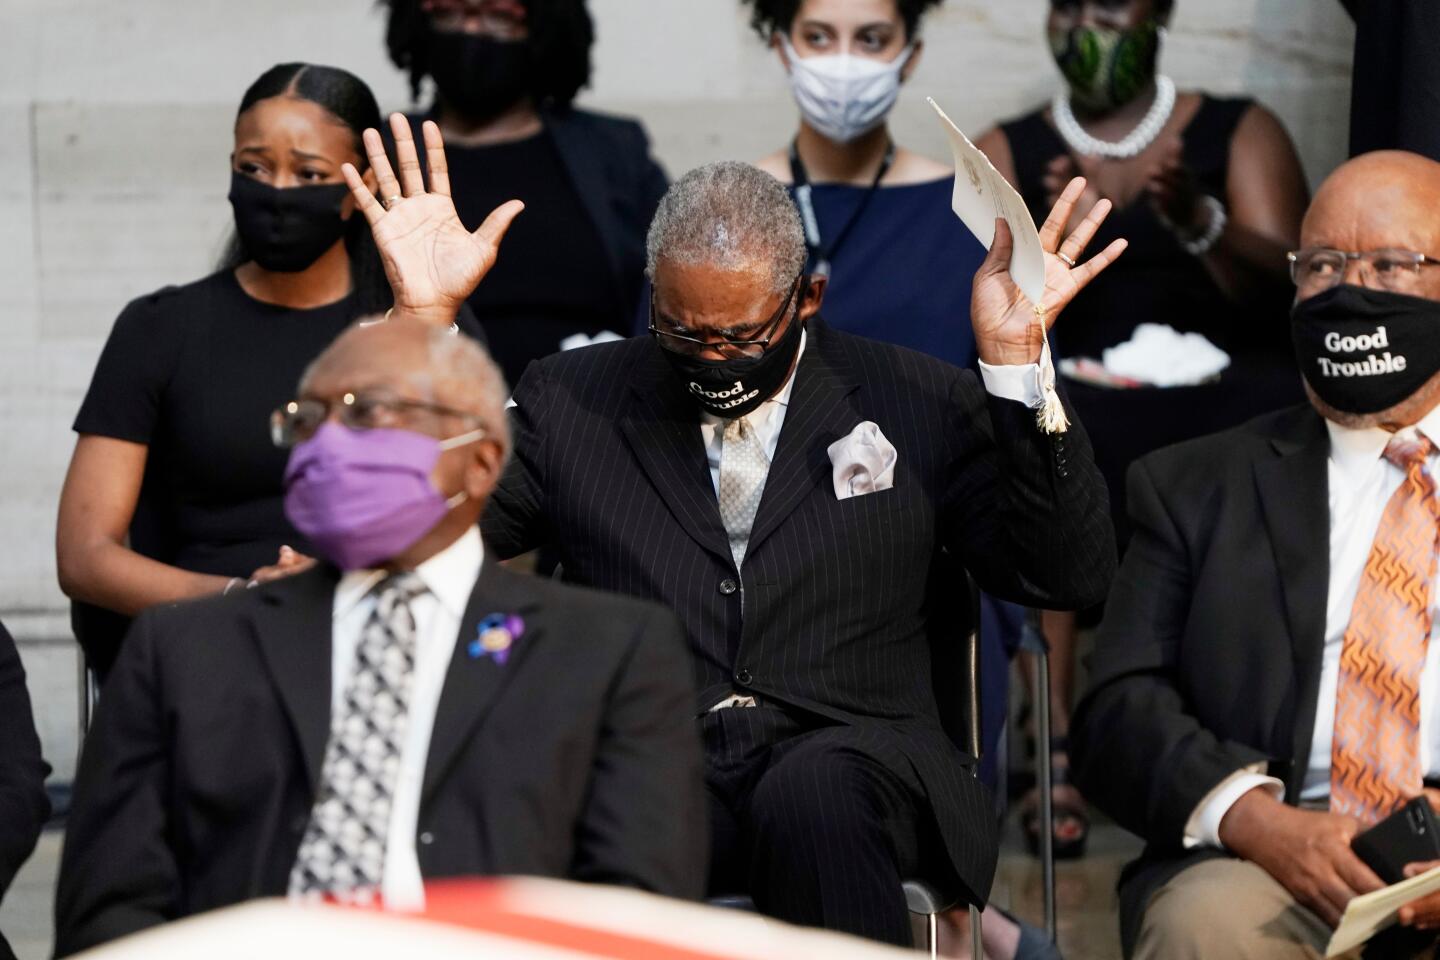 Rep. Gregory Meeks, D-NY, raises his hands as Amazing Grace is played during the ceremony for the late Rep. John Lewis in the Rotunda of the US Capitol in Washington, DC.